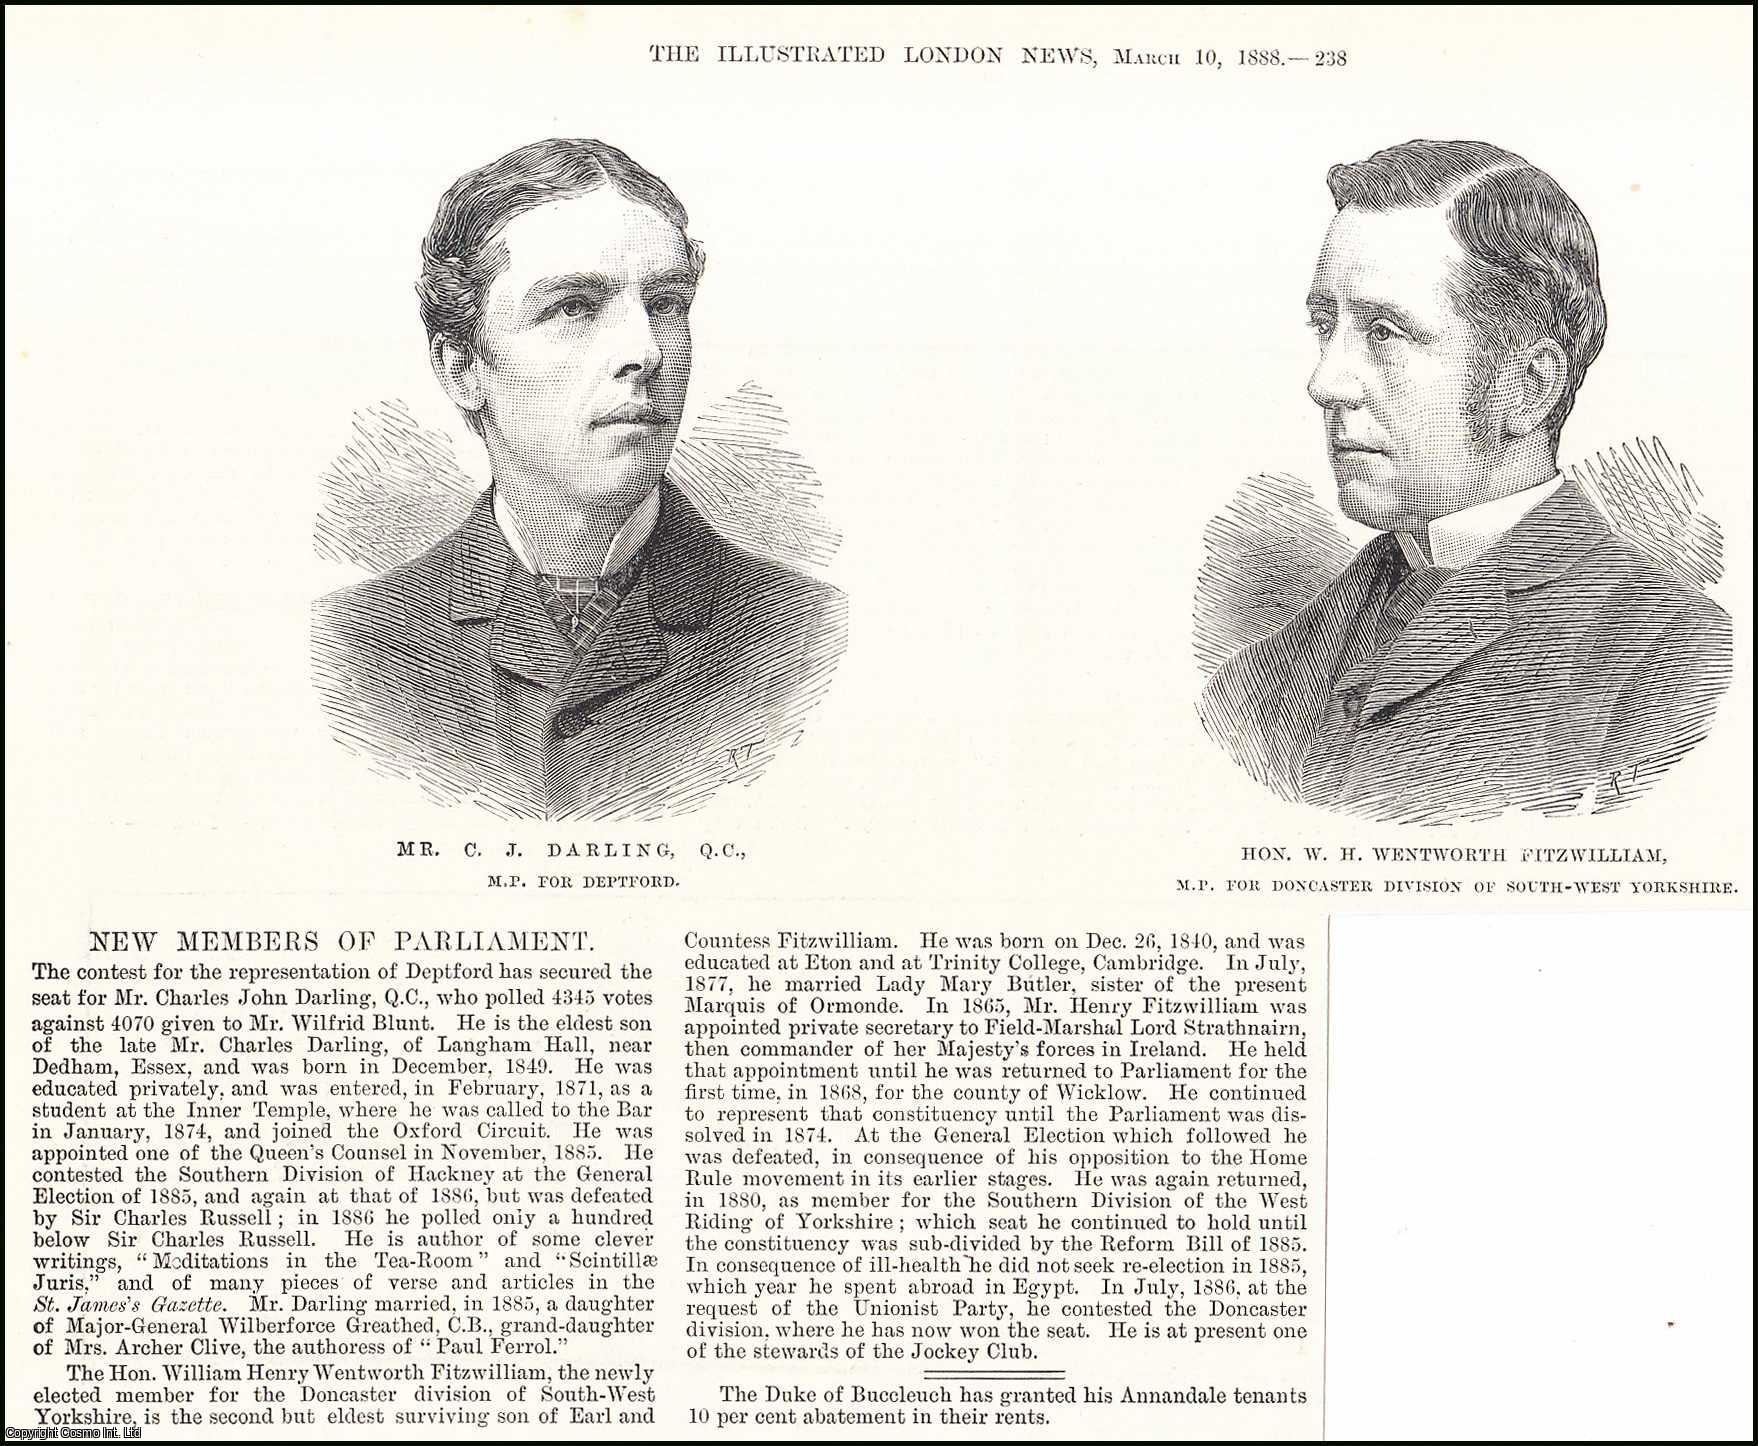 POLITICS - New Members of Parliament: Representing Deptford and Doncaster; Mr C.J. Darling and Hon. W.H. Wentworth Fitzwilliam. An original print from the Illustrated London News, 1888.